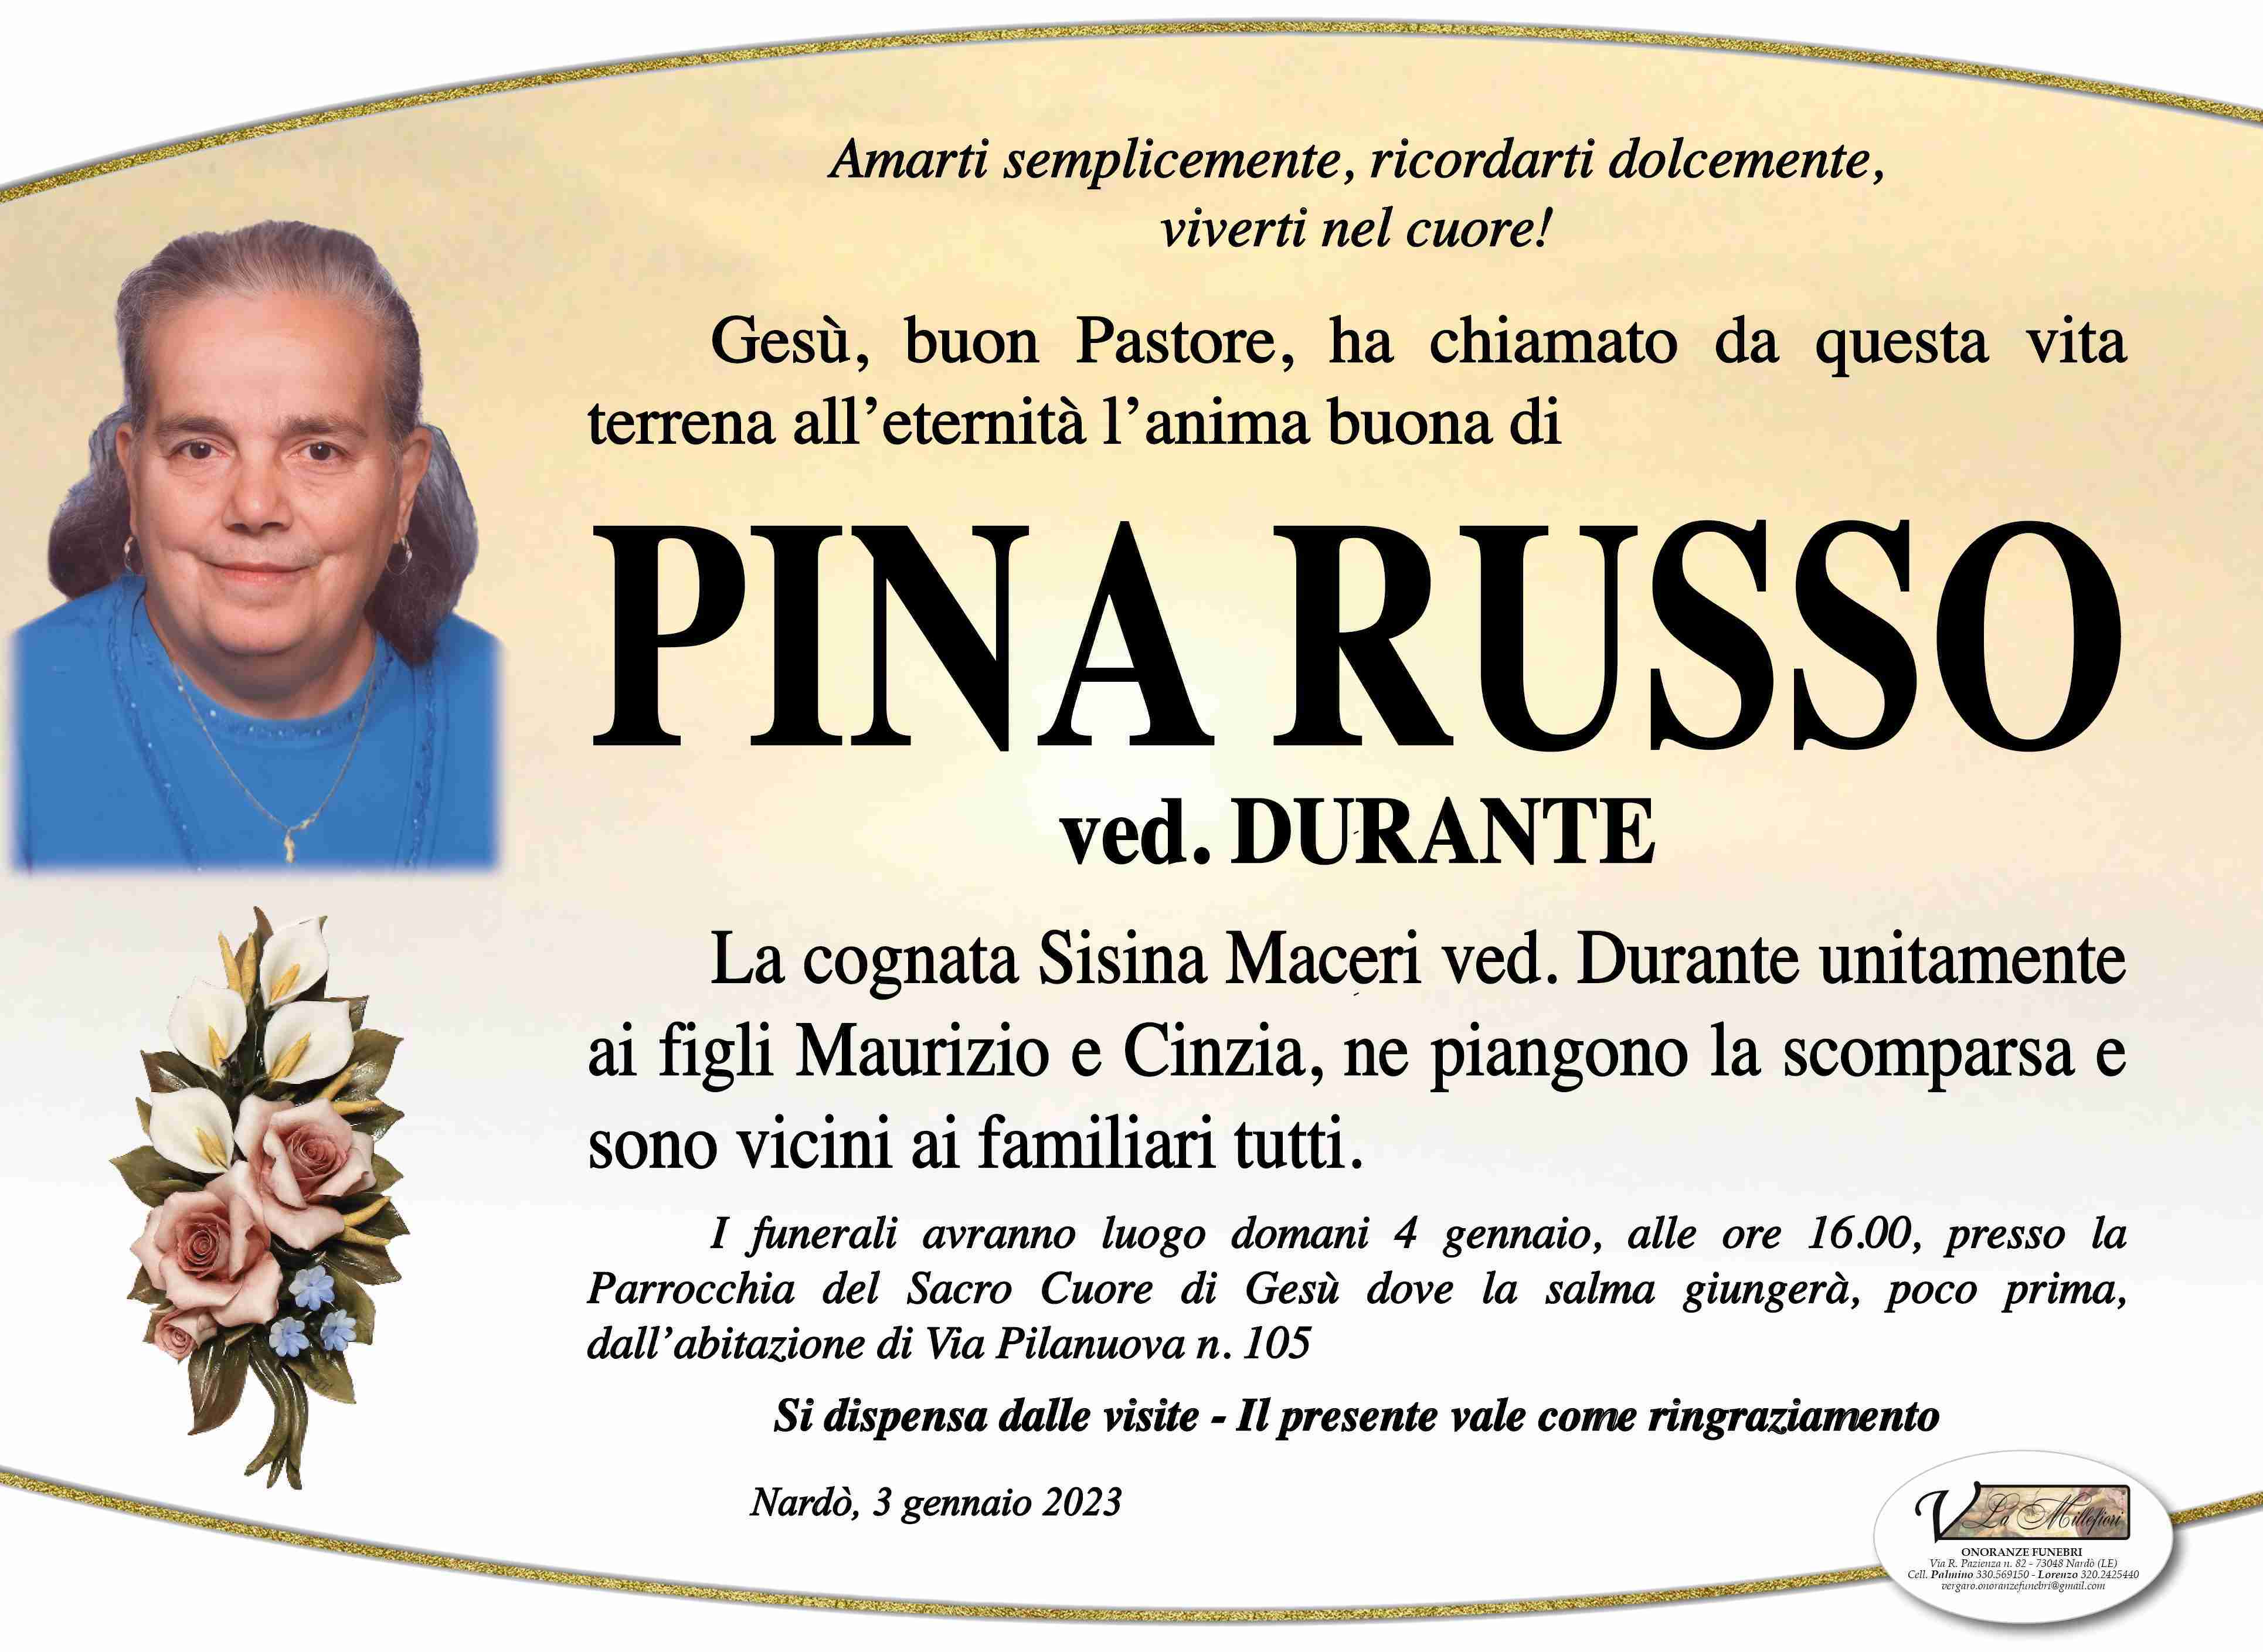 Pina Russo